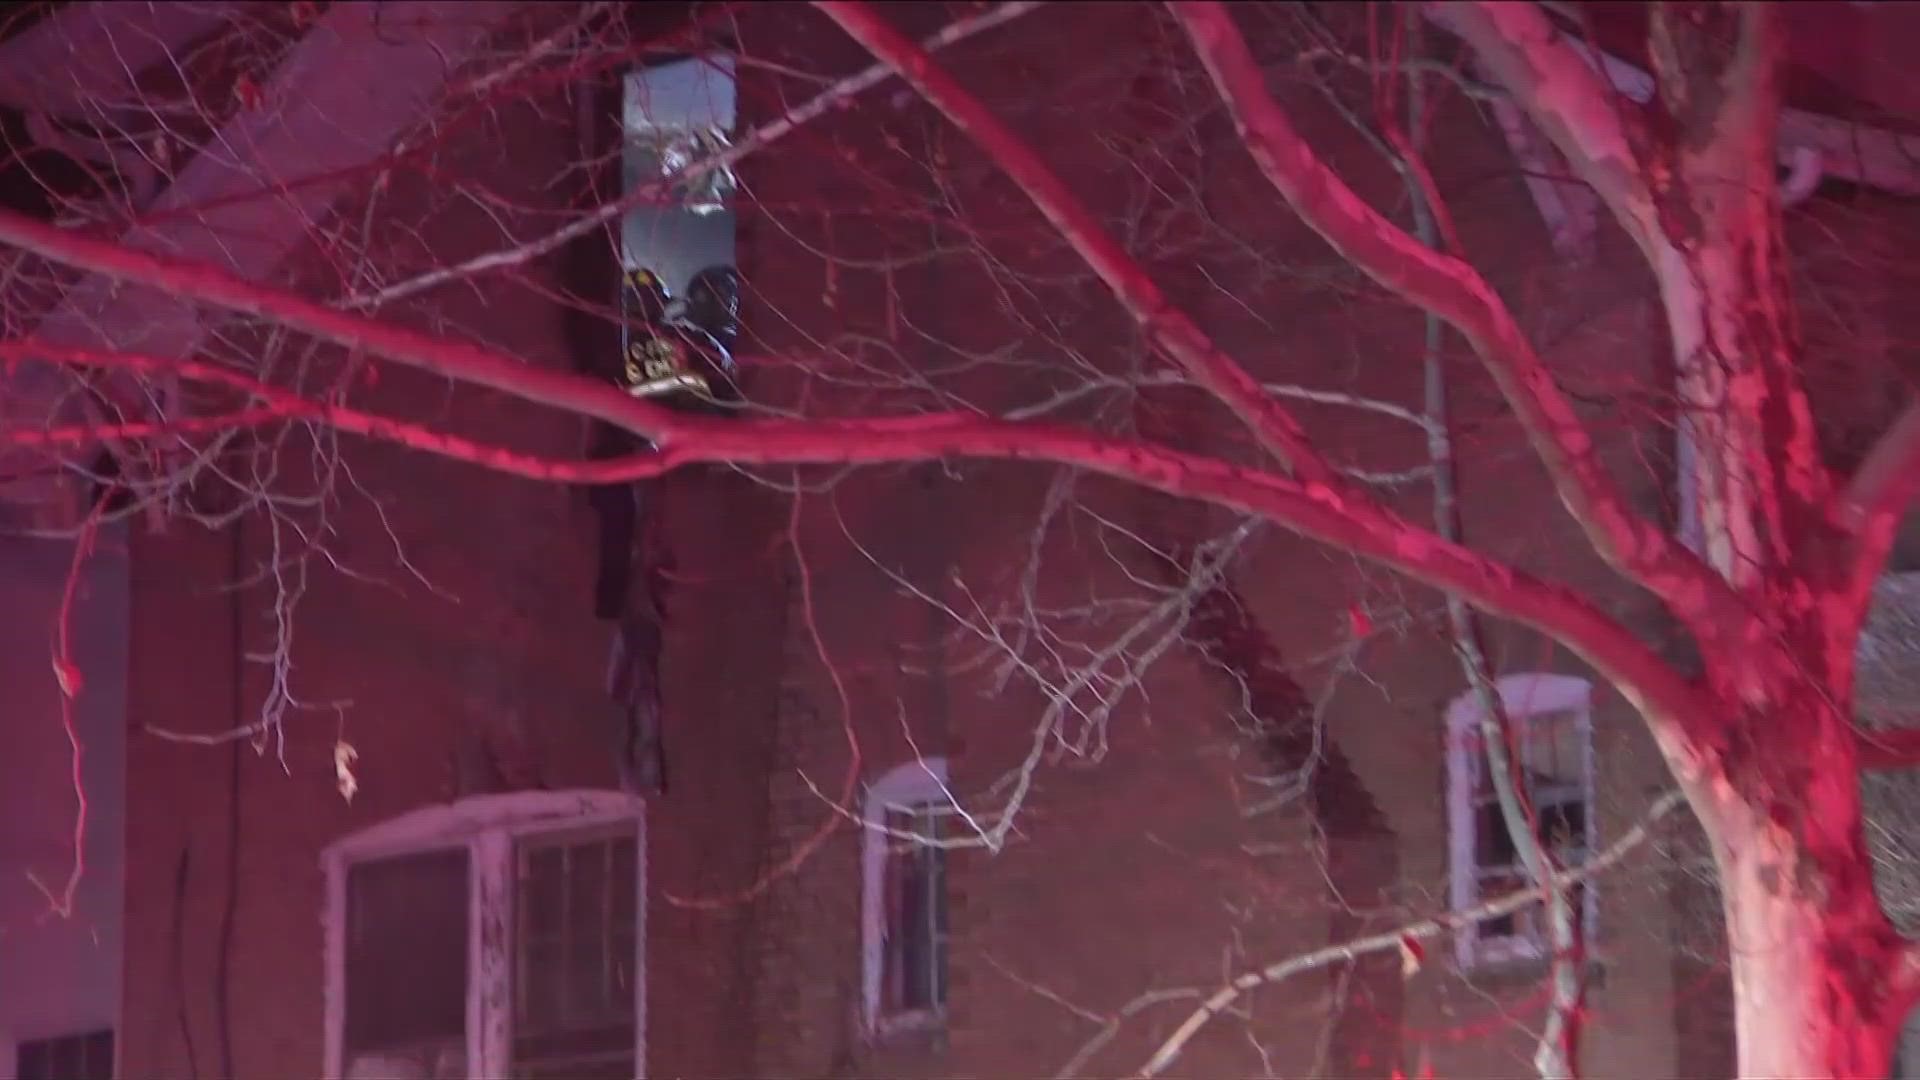 Two people are suffering from critical injuries early Tuesday morning after a fire broke out in a two-story building in Northwest D.C.